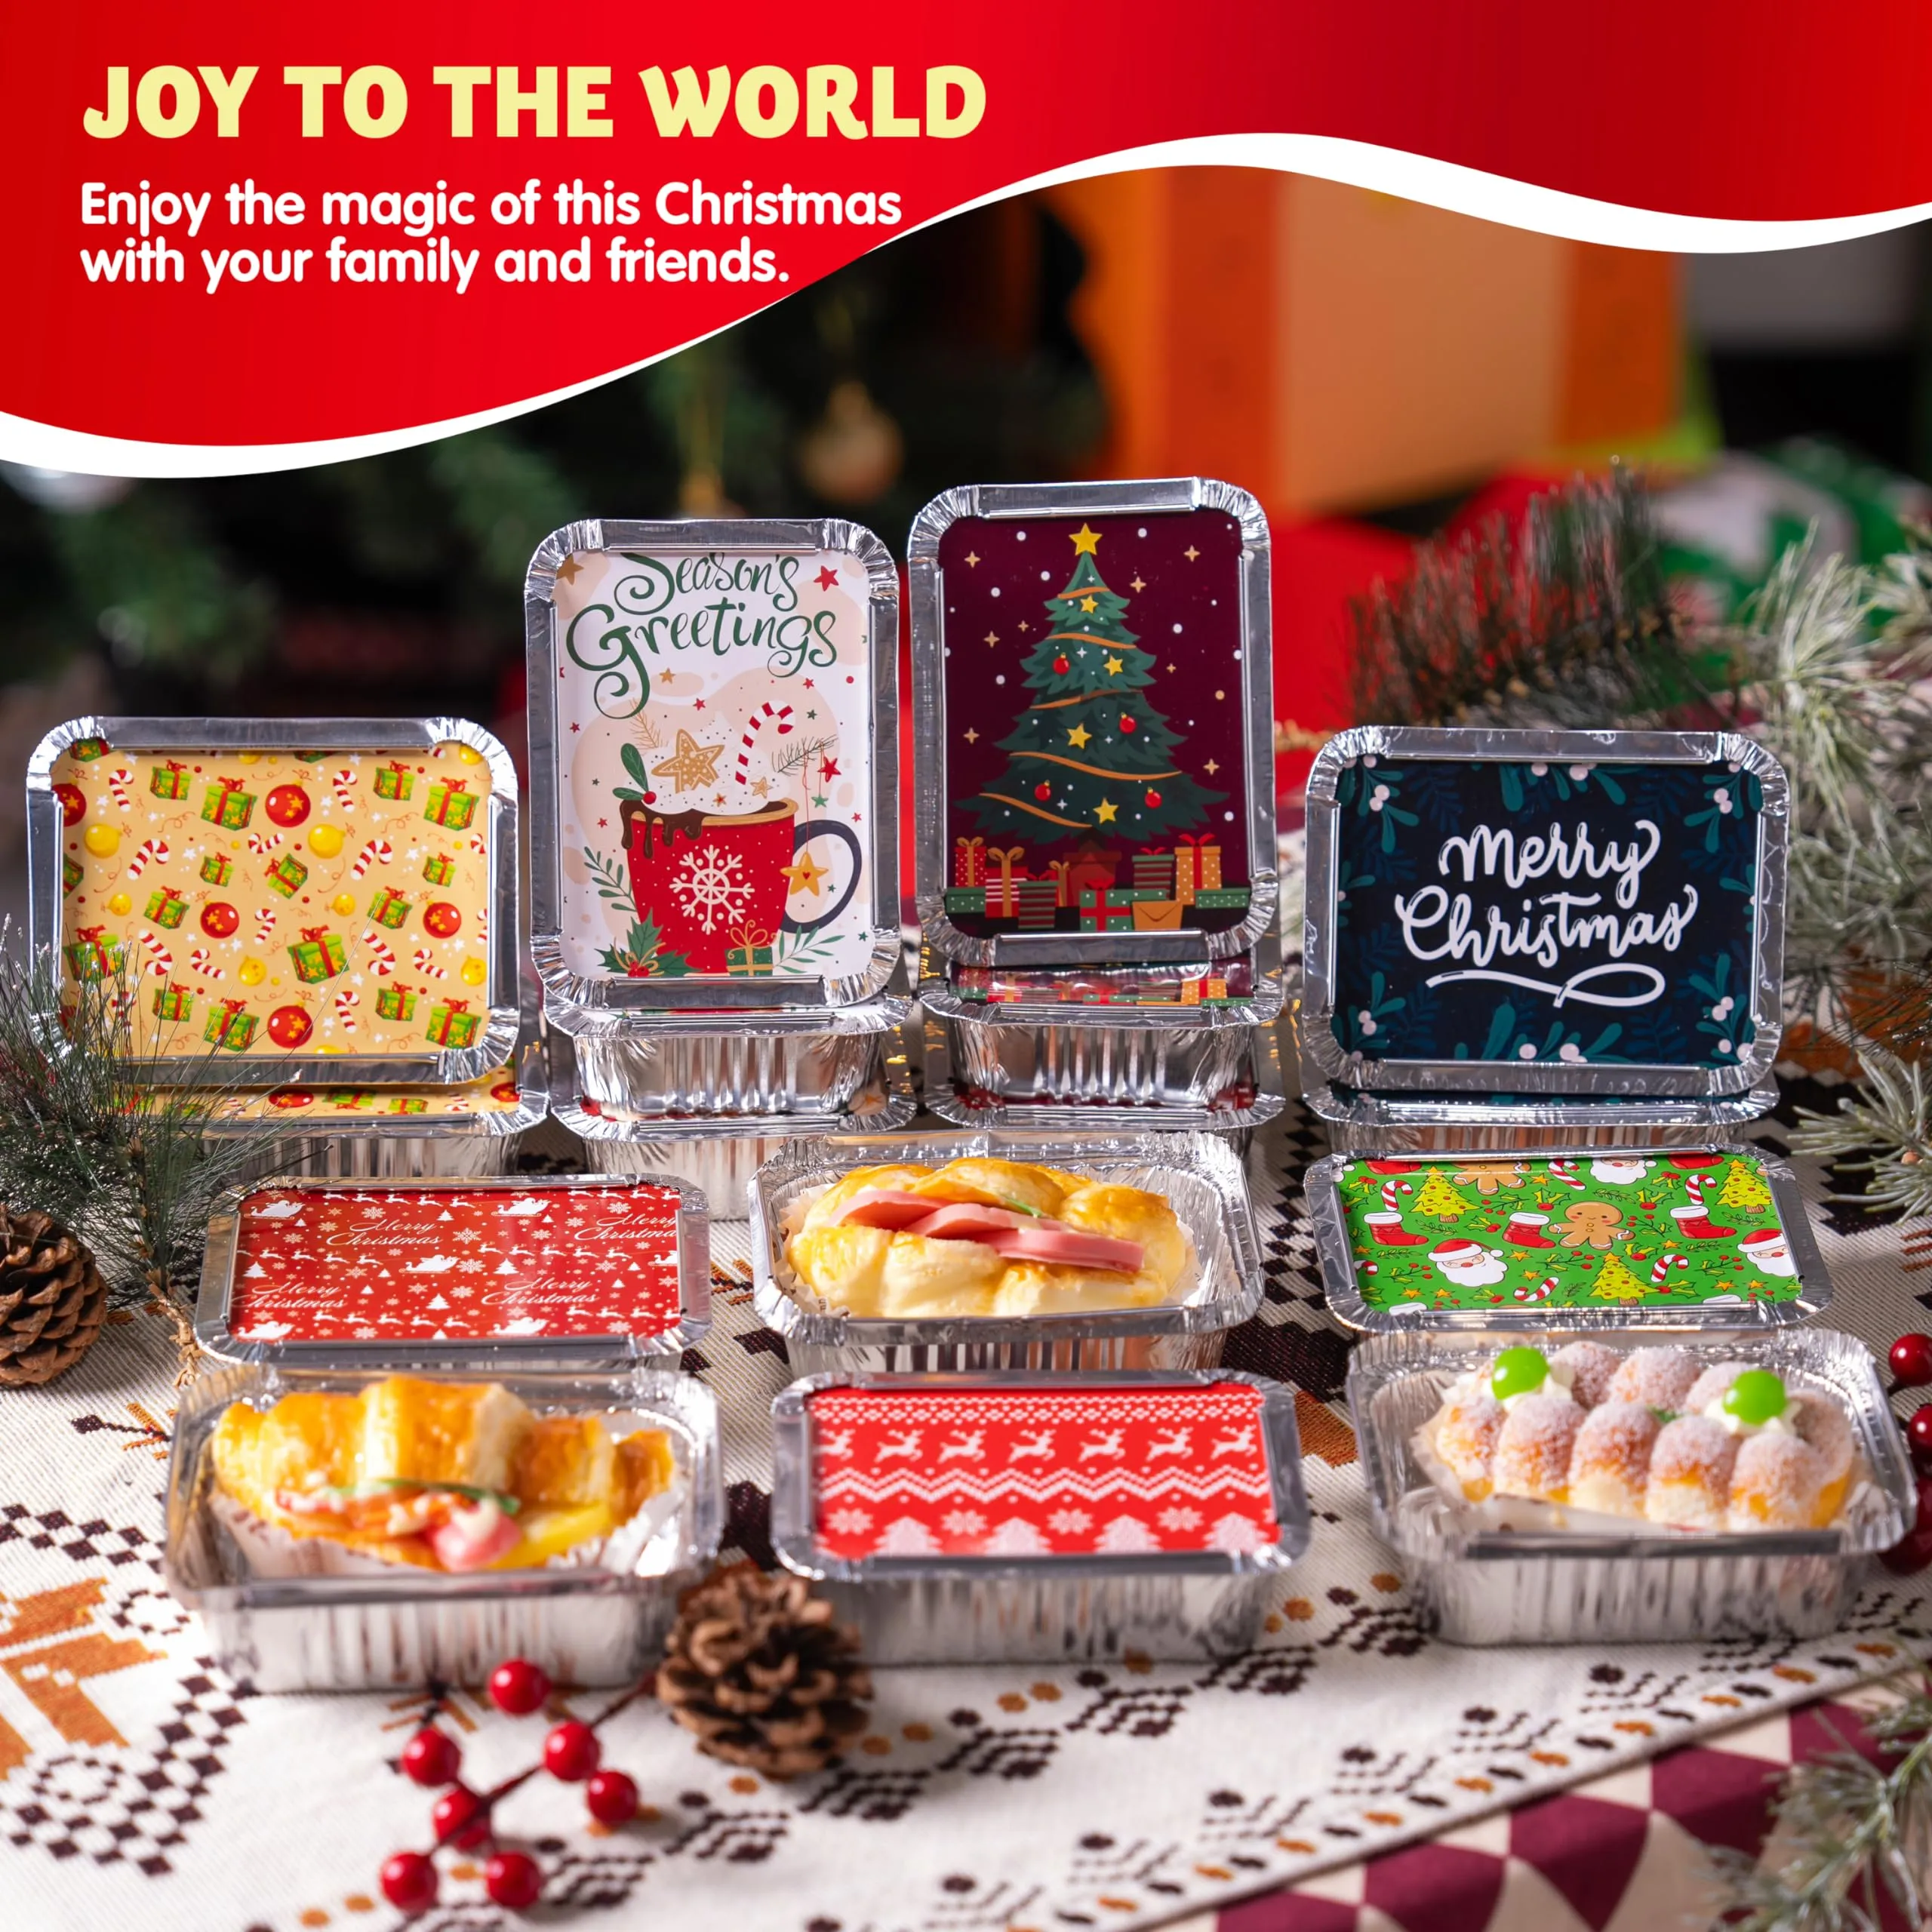 https://www.joyfy.com/wp-content/uploads/2023/11/36-Pieces-9-Designs-Christmas-Foil-Containers-with-Lids-5in-x4in-x1.5in-4.webp